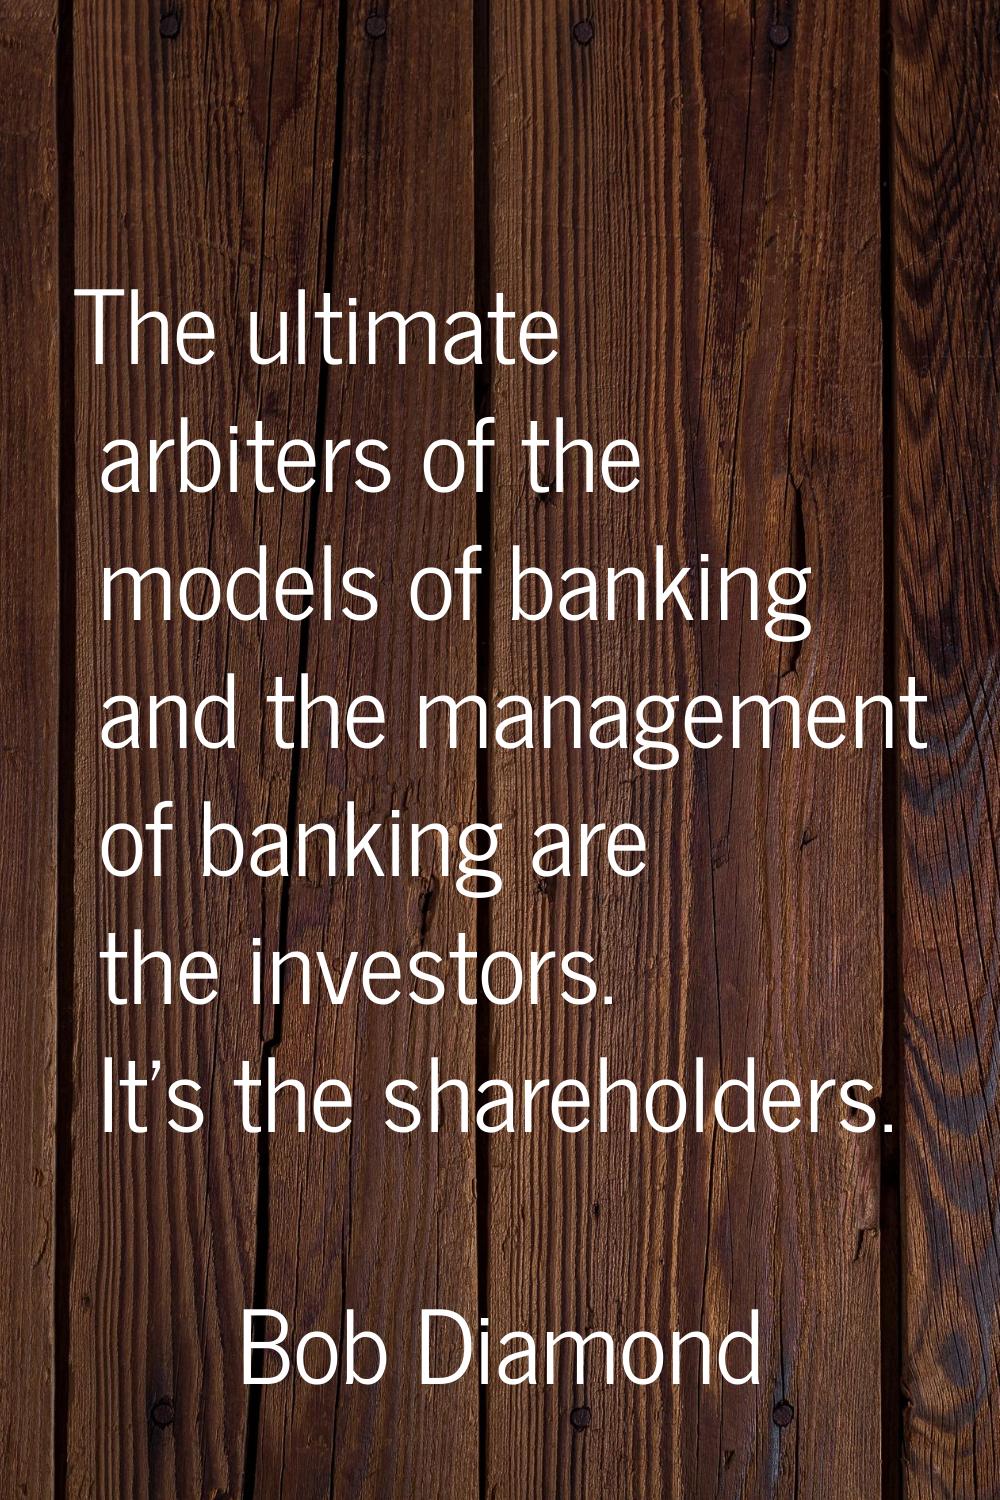 The ultimate arbiters of the models of banking and the management of banking are the investors. It'